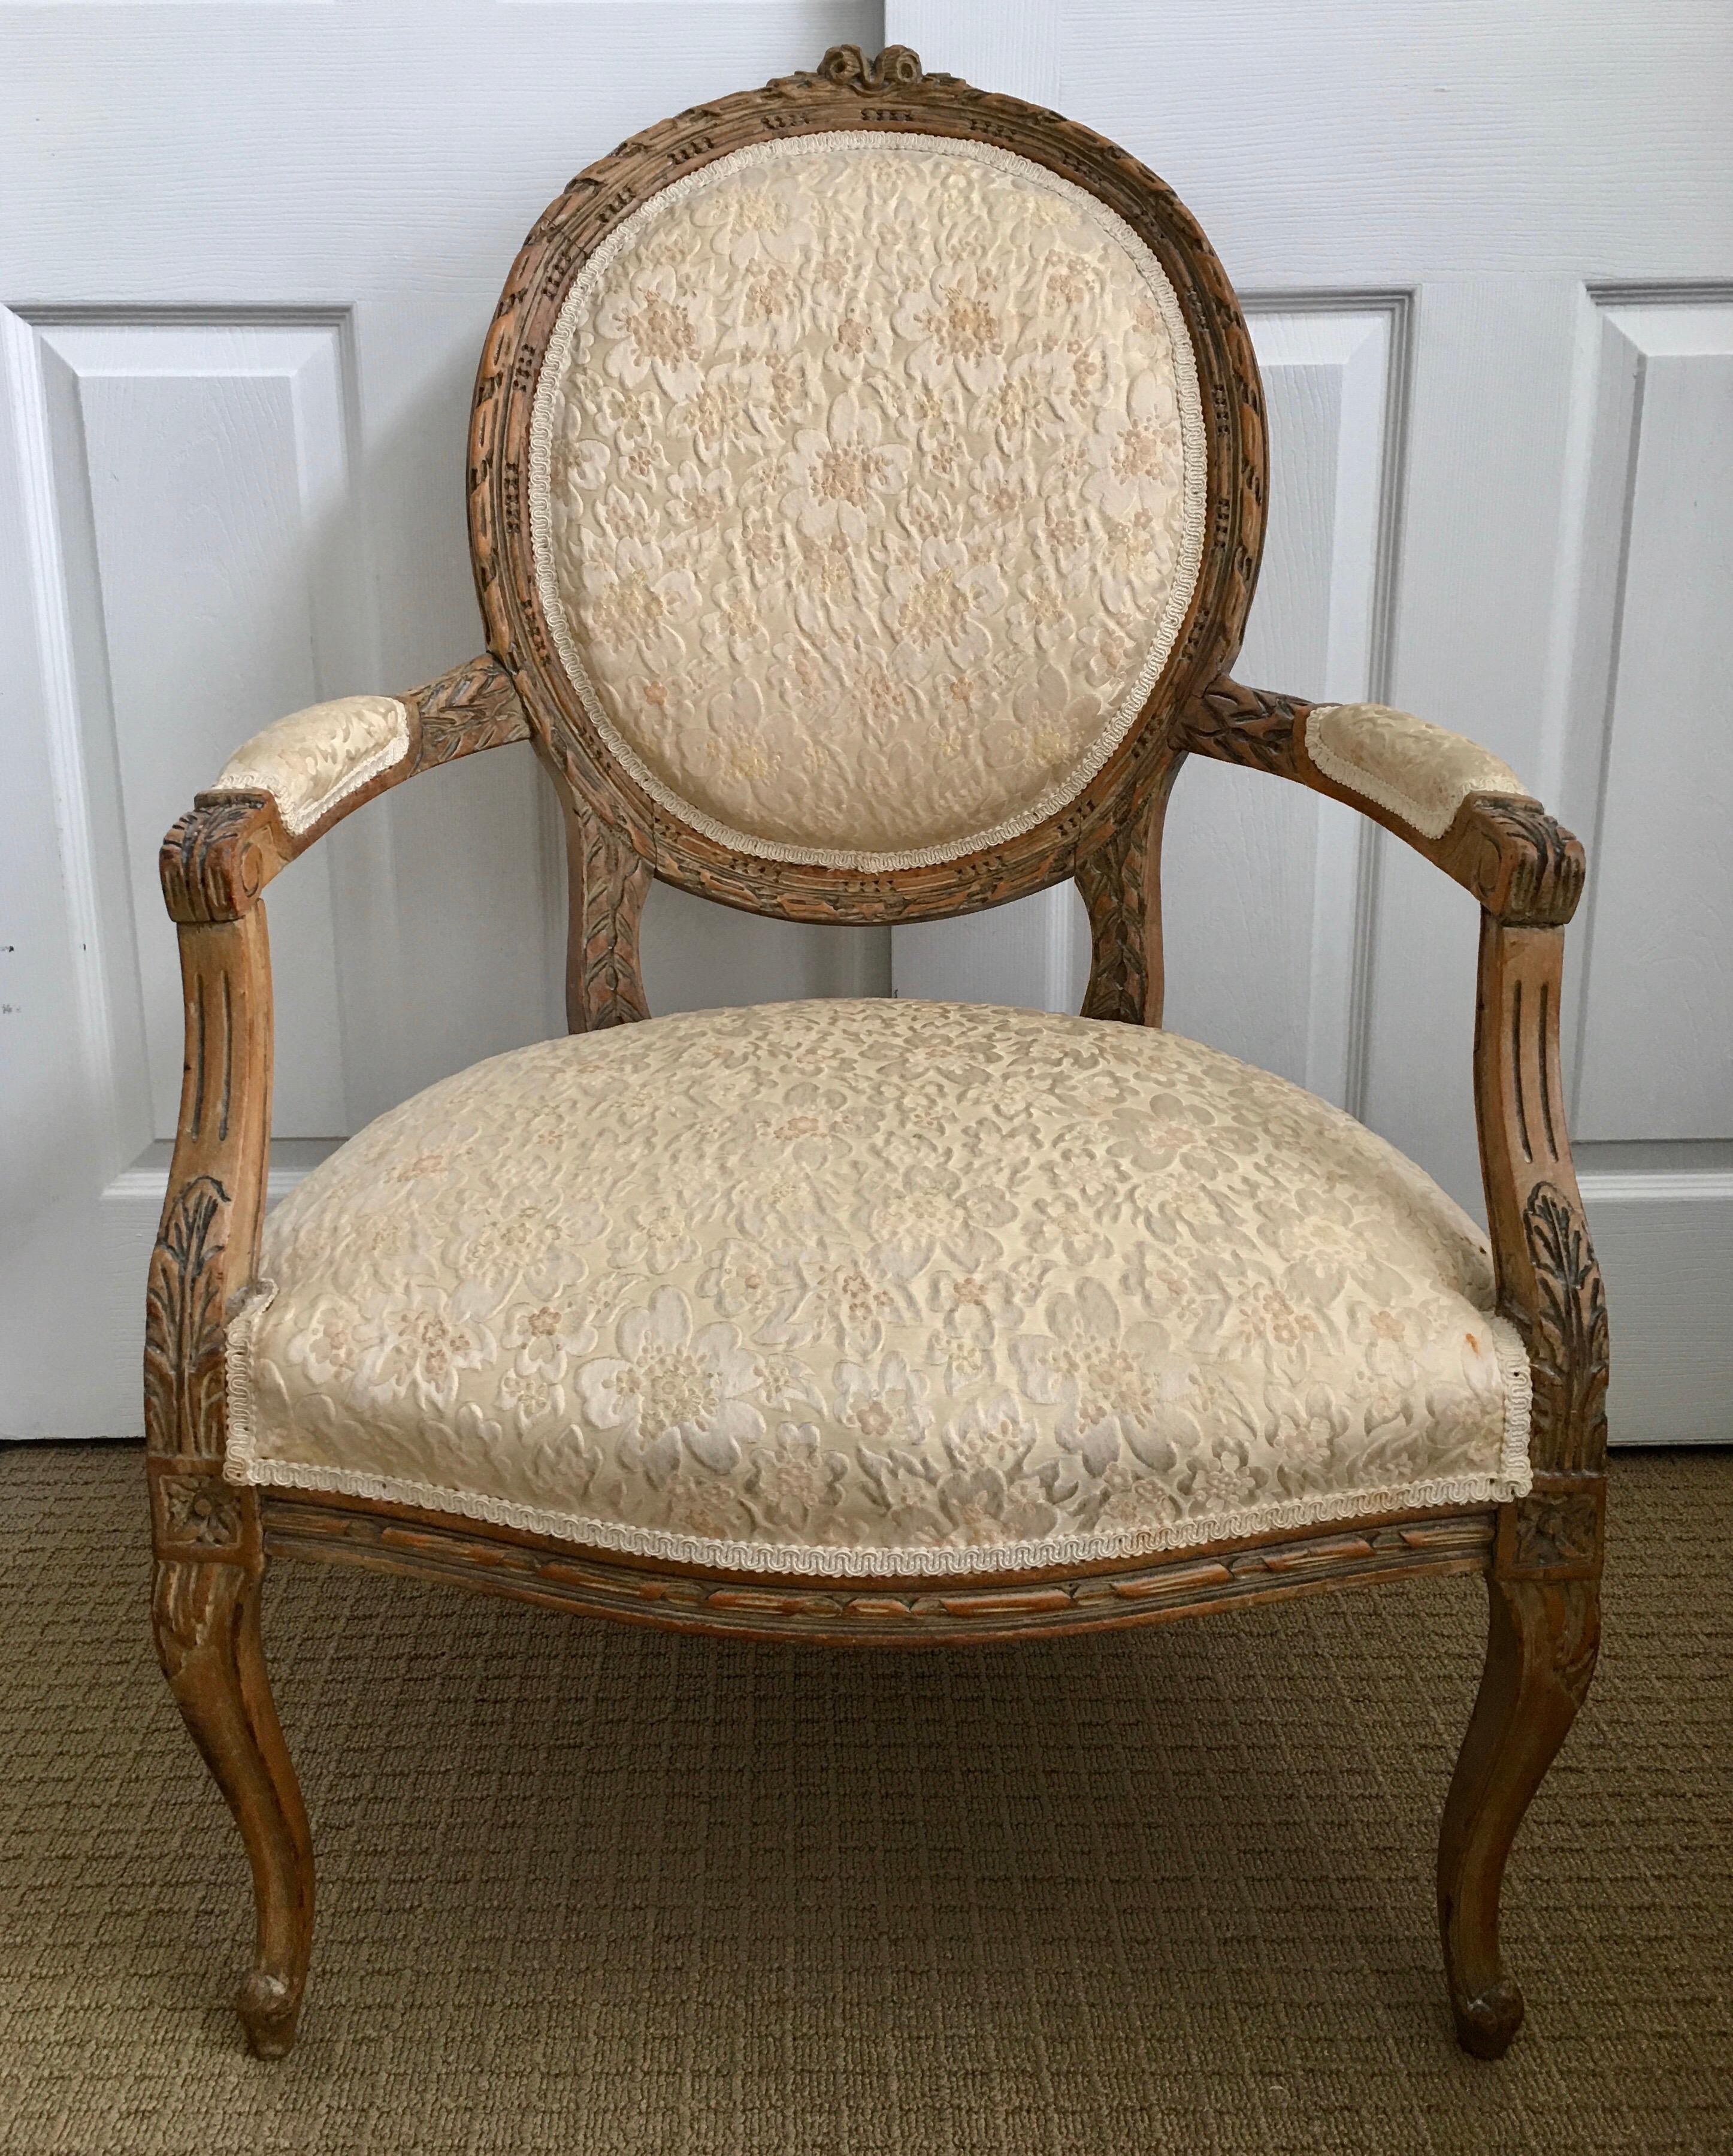 Mid-20th century Louis XVI style natural wood carved fauteuil armchair. This oval back chair features beautifully carved acanthus leaf appointments and cabriole legs. A beautiful bedroom or living room accent chair. 

Measures: Inside seat depth